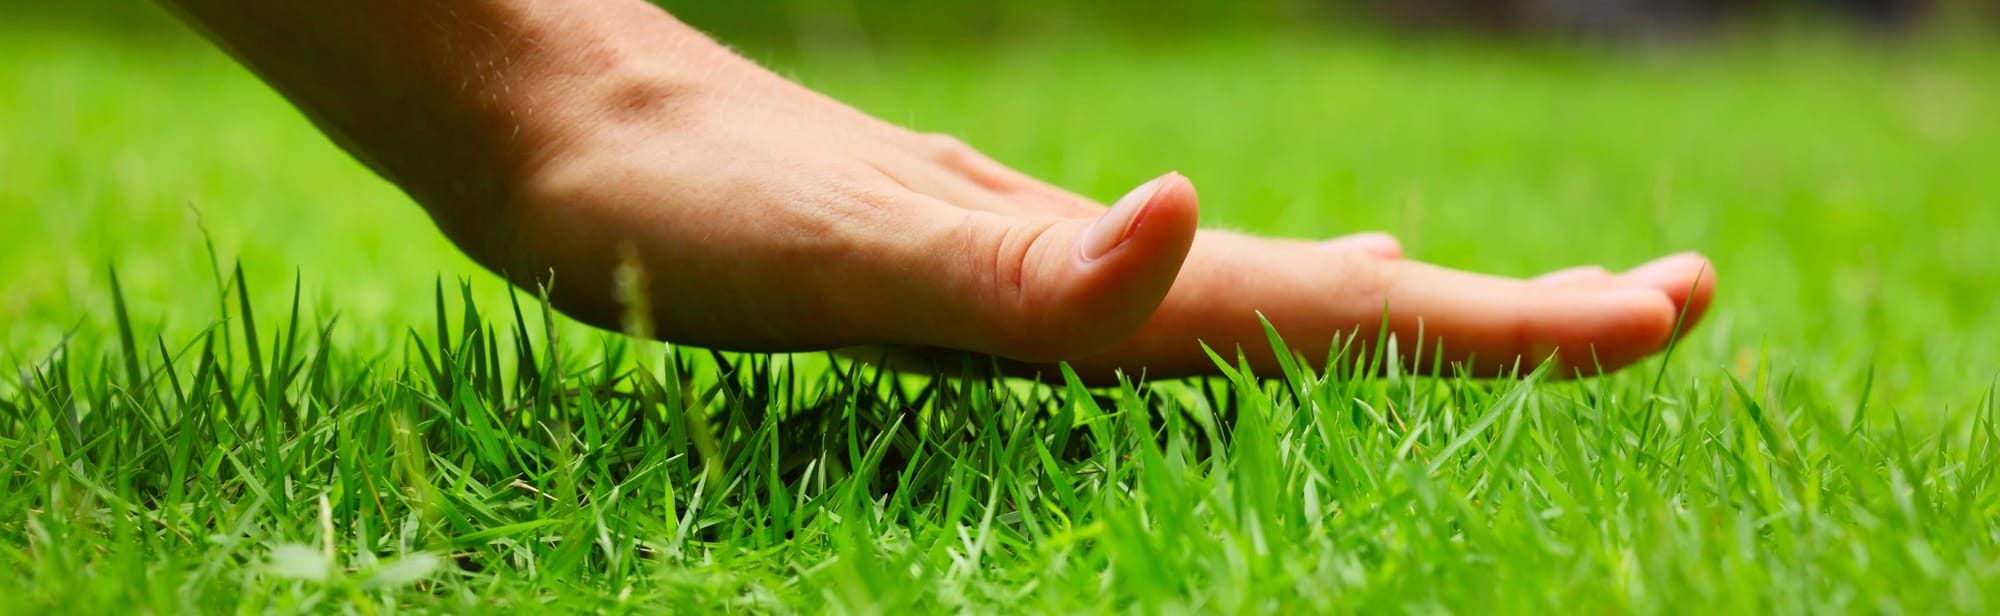 hand-touching-lawn